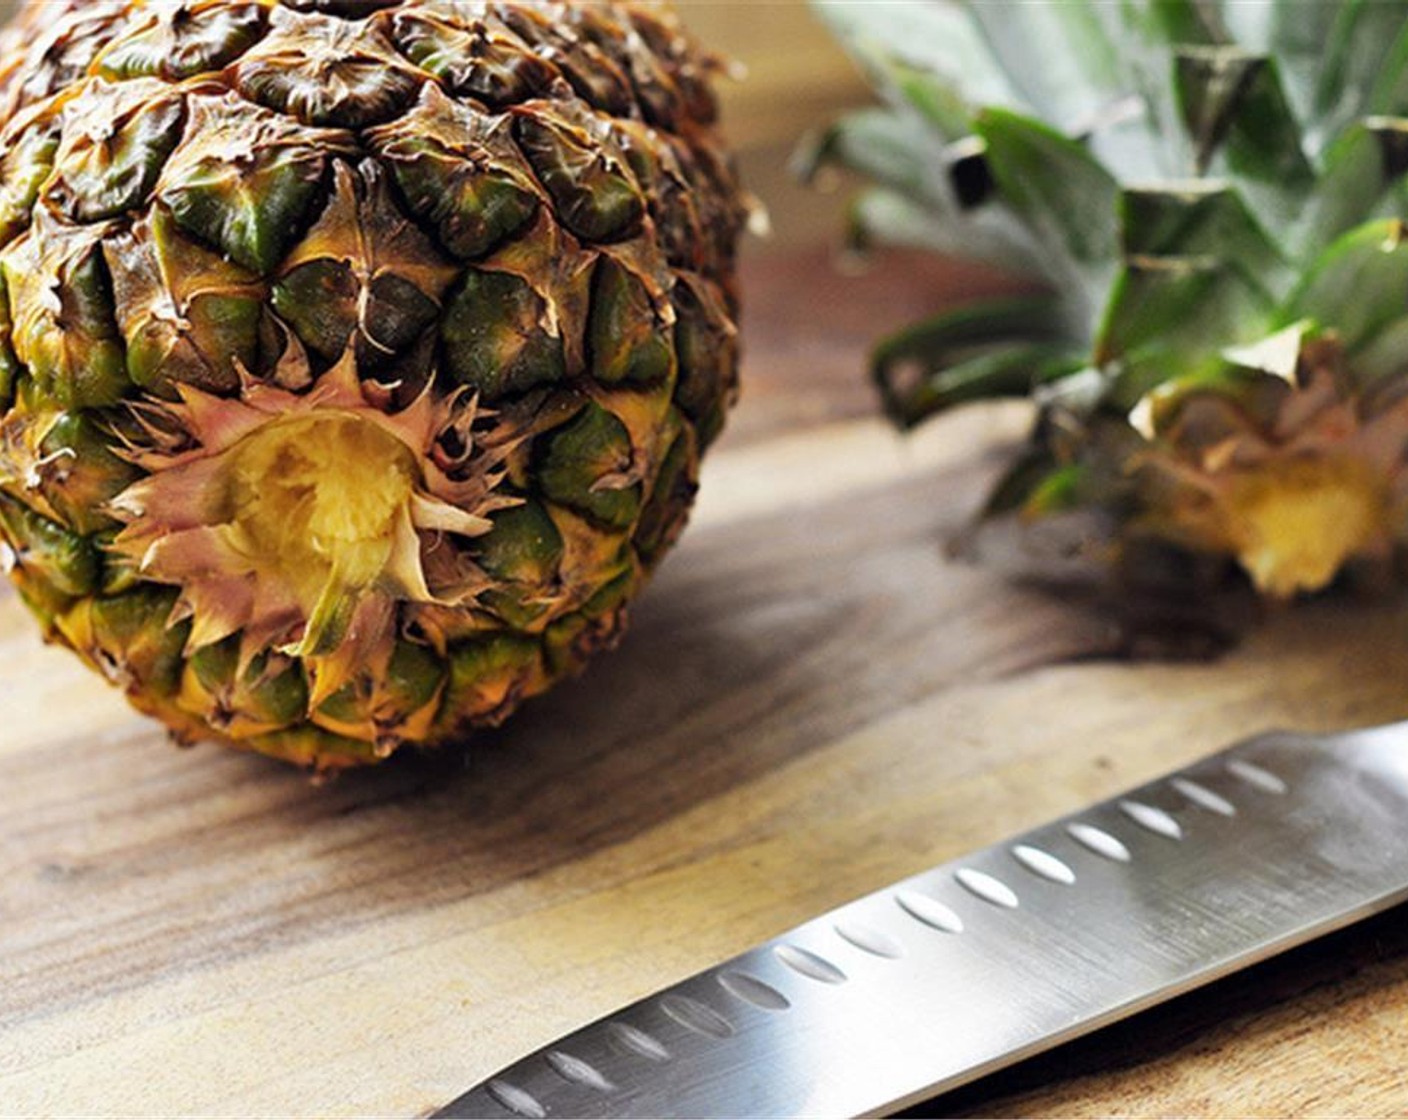 step 2 Prepare the Pineapple. To do this, cut off both ends of the pineapple so that it stands upright. Grab your knife, starting at the top, cut the peel away in one swift downward motion.